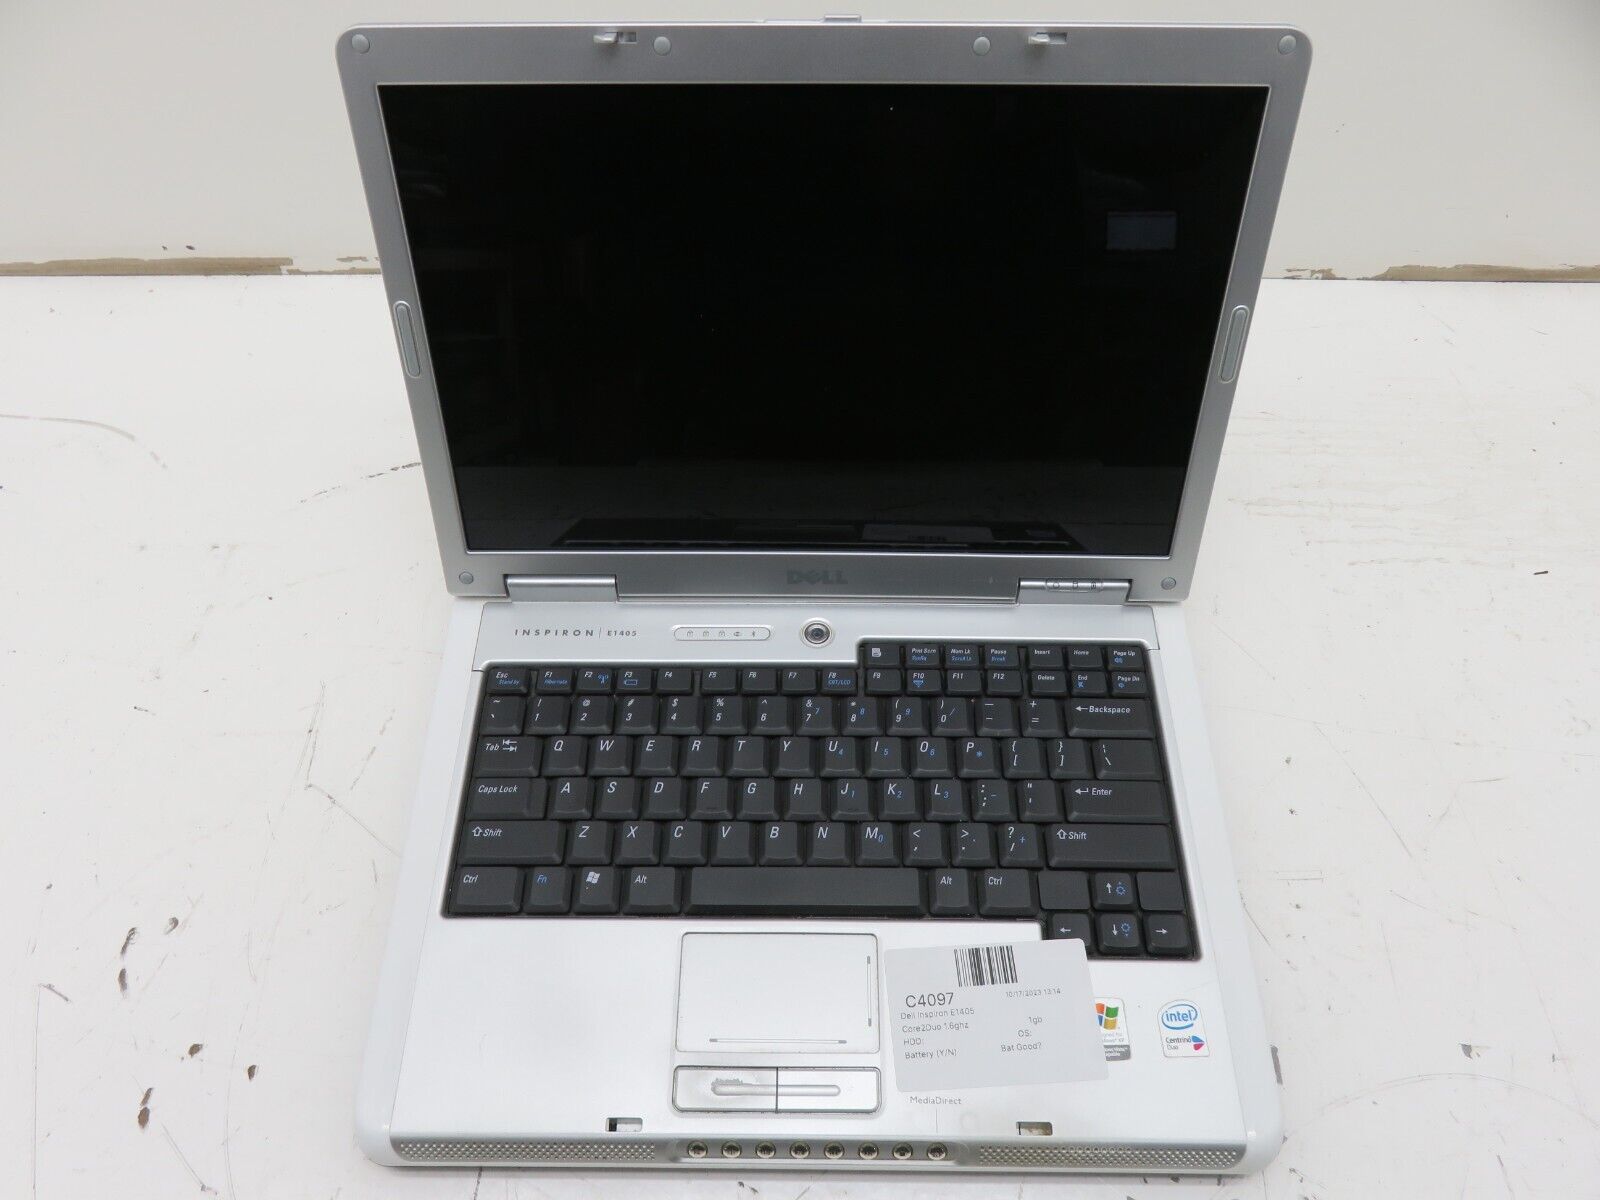 Dell Inspiron E1405 Laptop Intel Core 2 Duo 1GB Ram No HDD or Battery